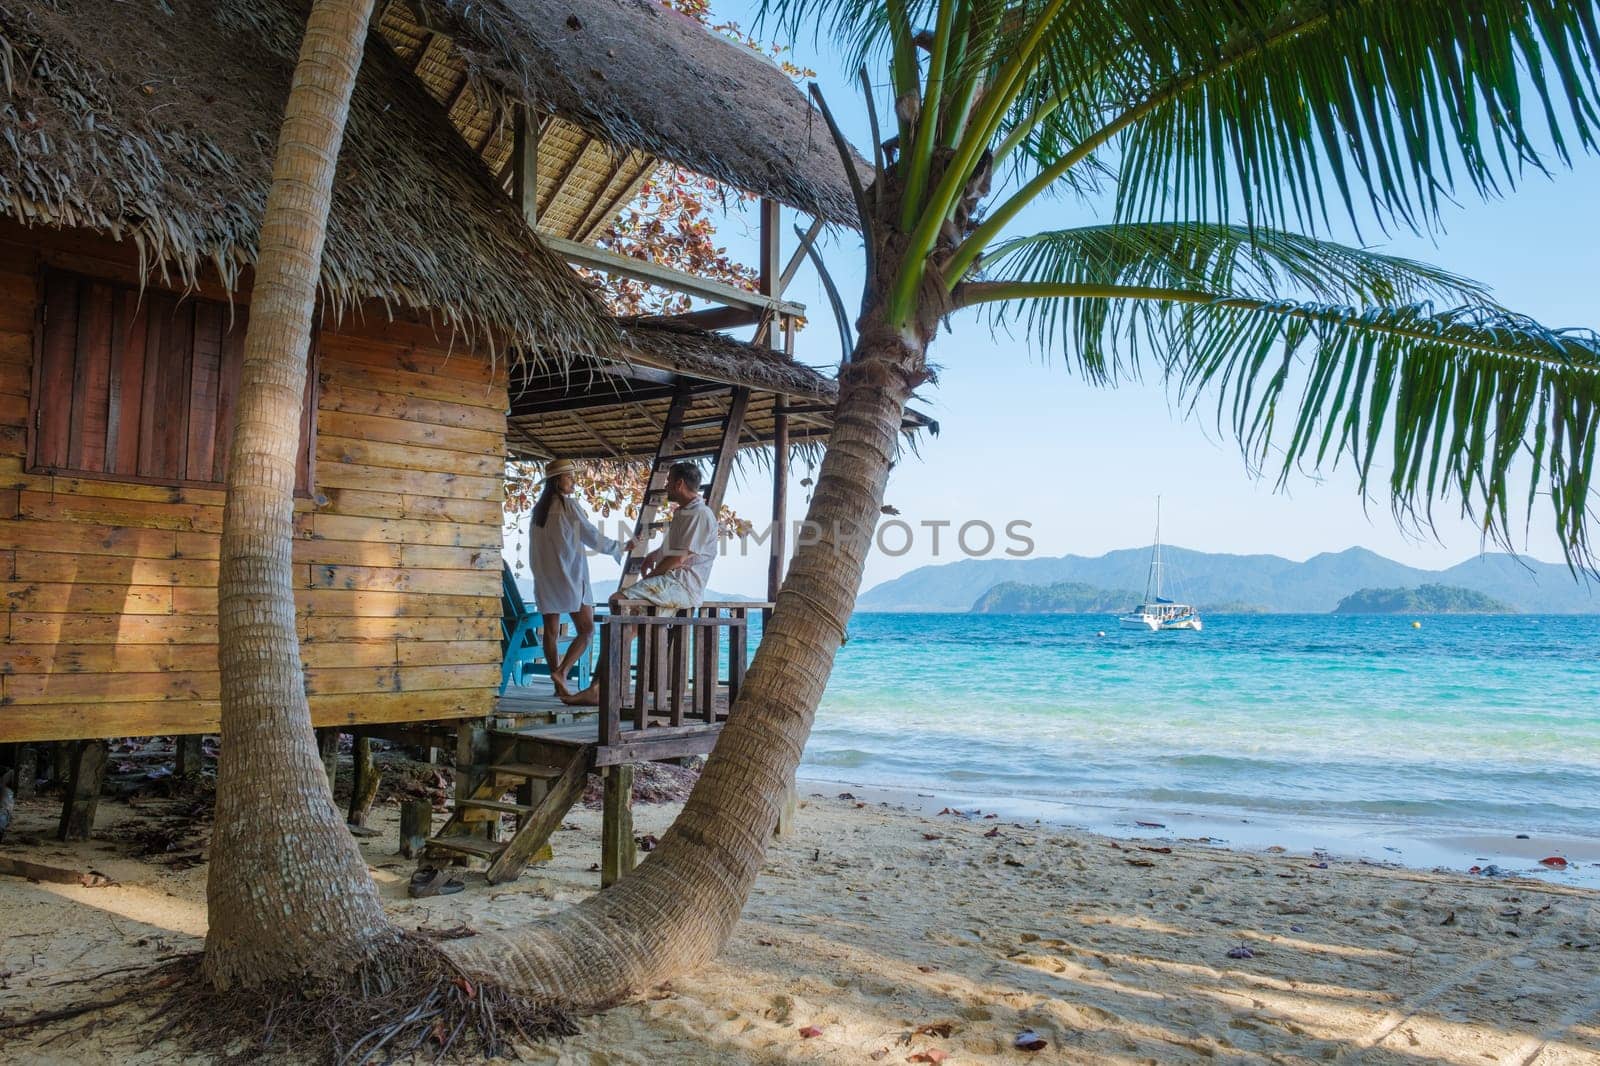 Koh Wai Island Trat Thailand wooden bamboo hut bungalow on the beach. a young couple of men and woman on a tropical Island in Thailand relaxing in a wooden bungalow on the beach